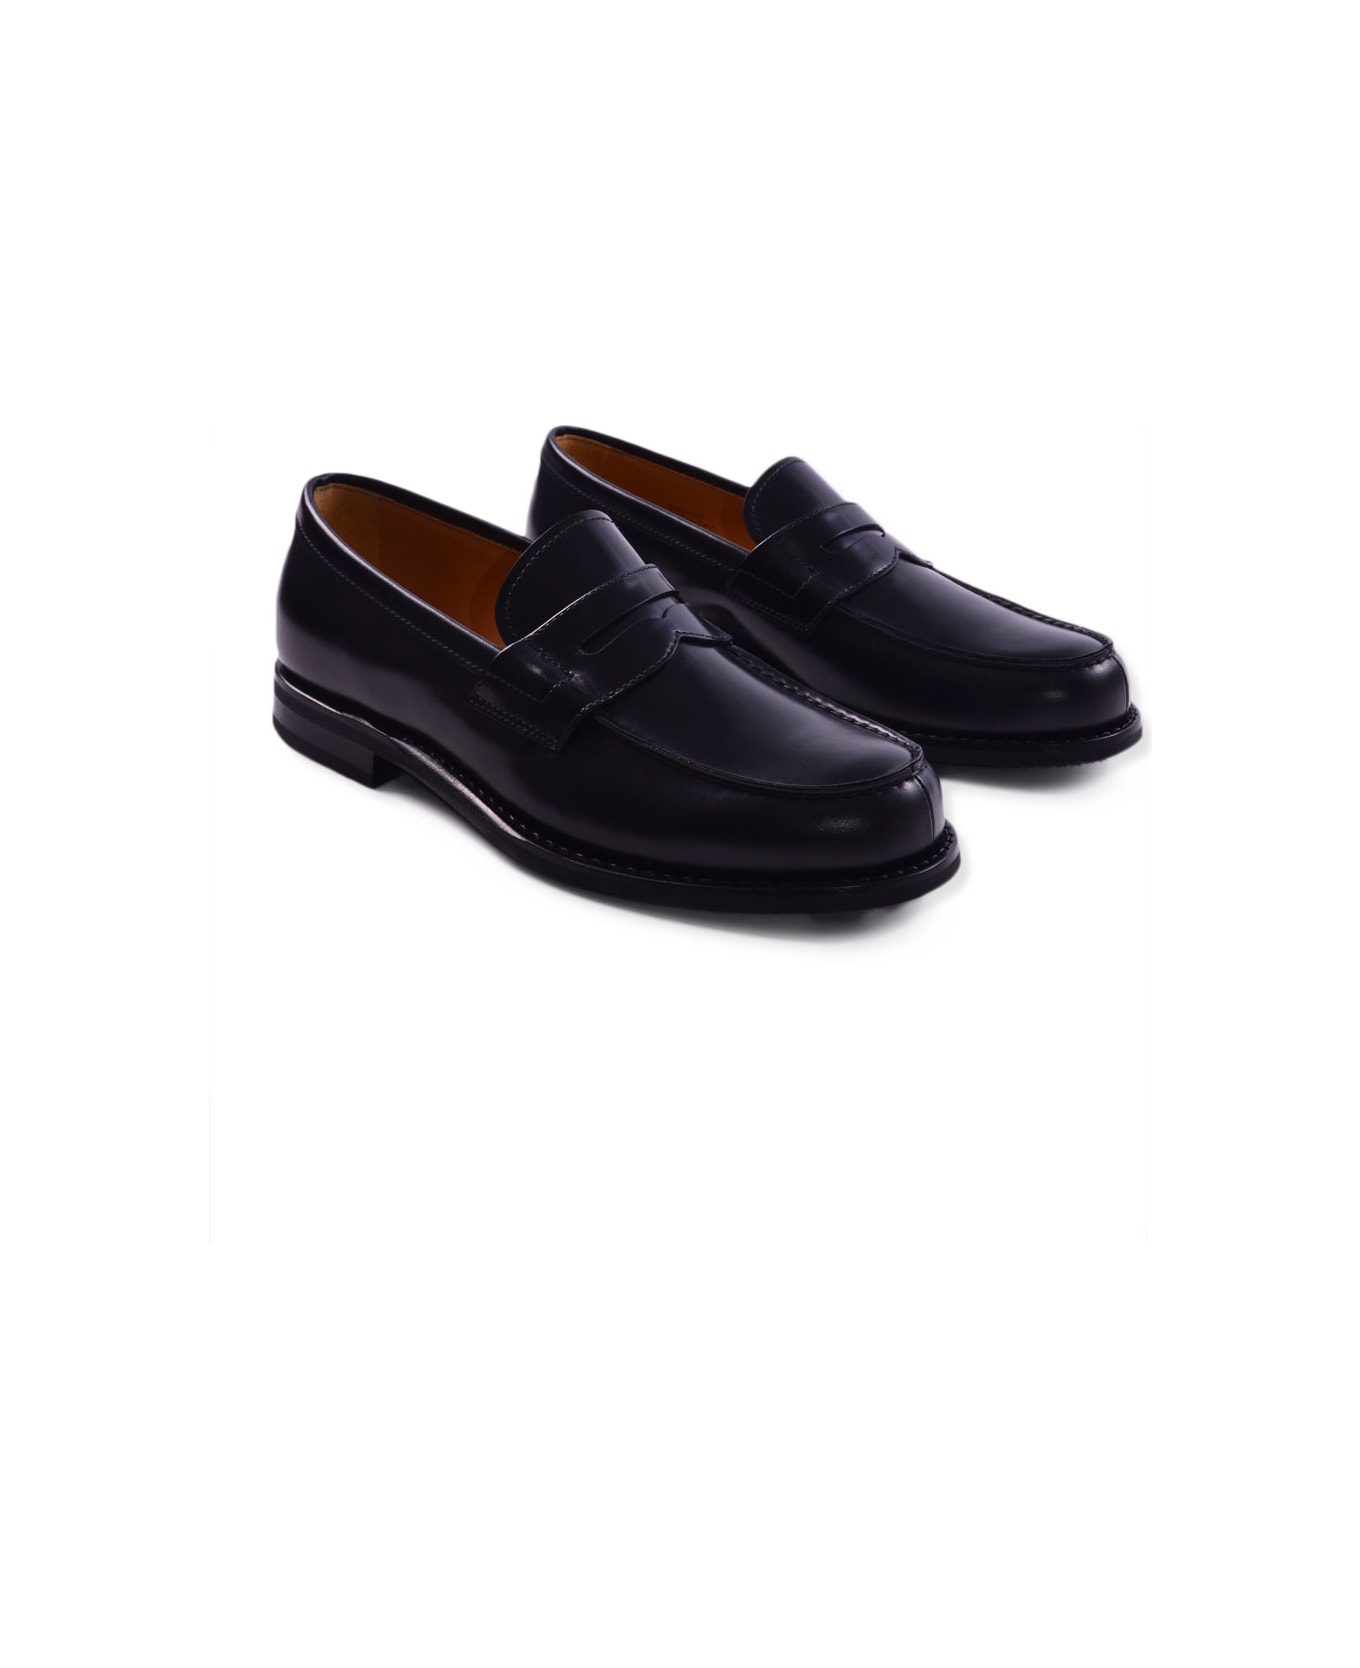 Church's Loafers - Black